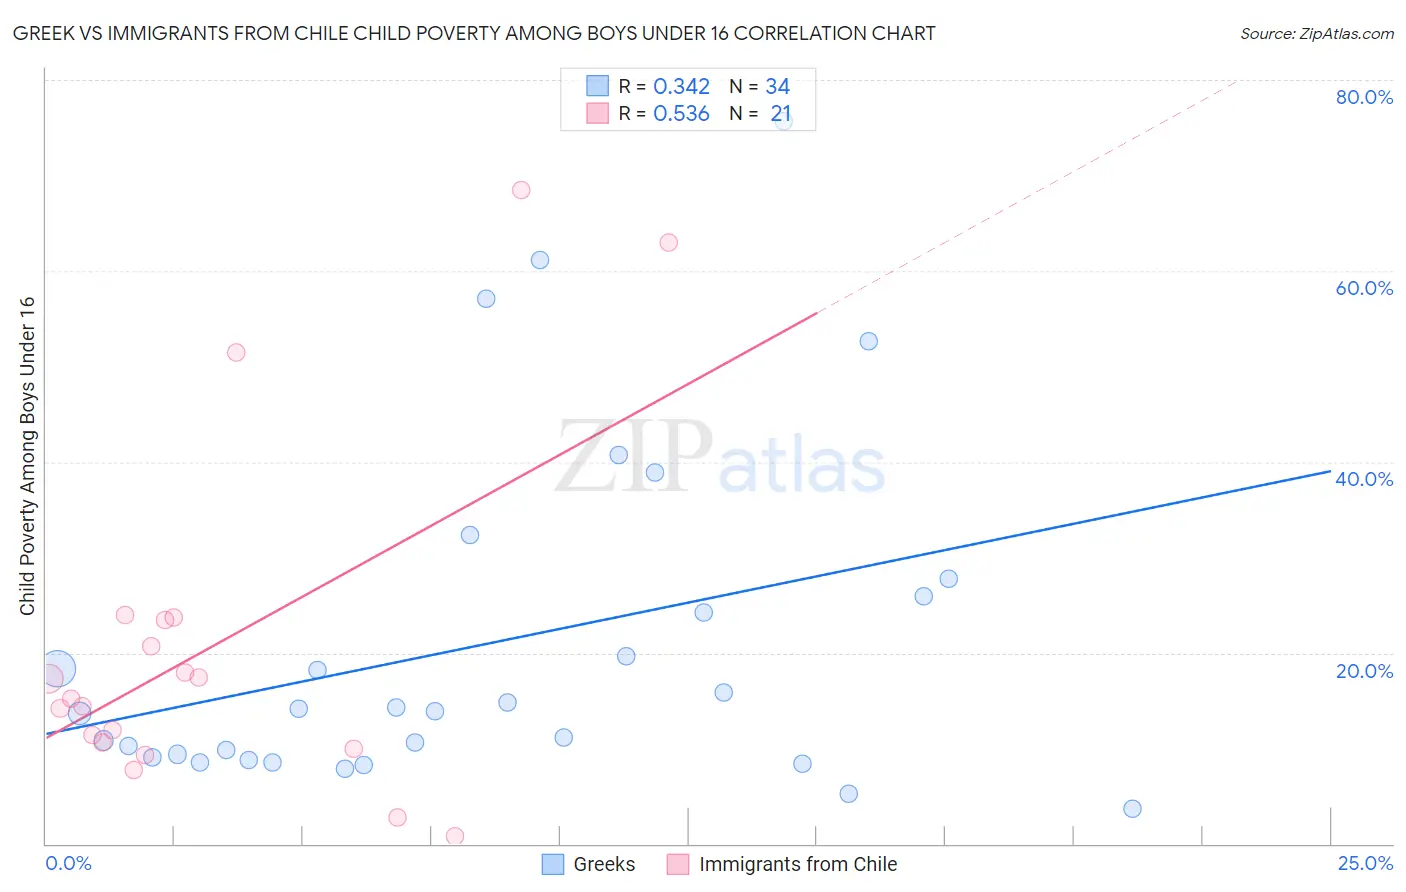 Greek vs Immigrants from Chile Child Poverty Among Boys Under 16